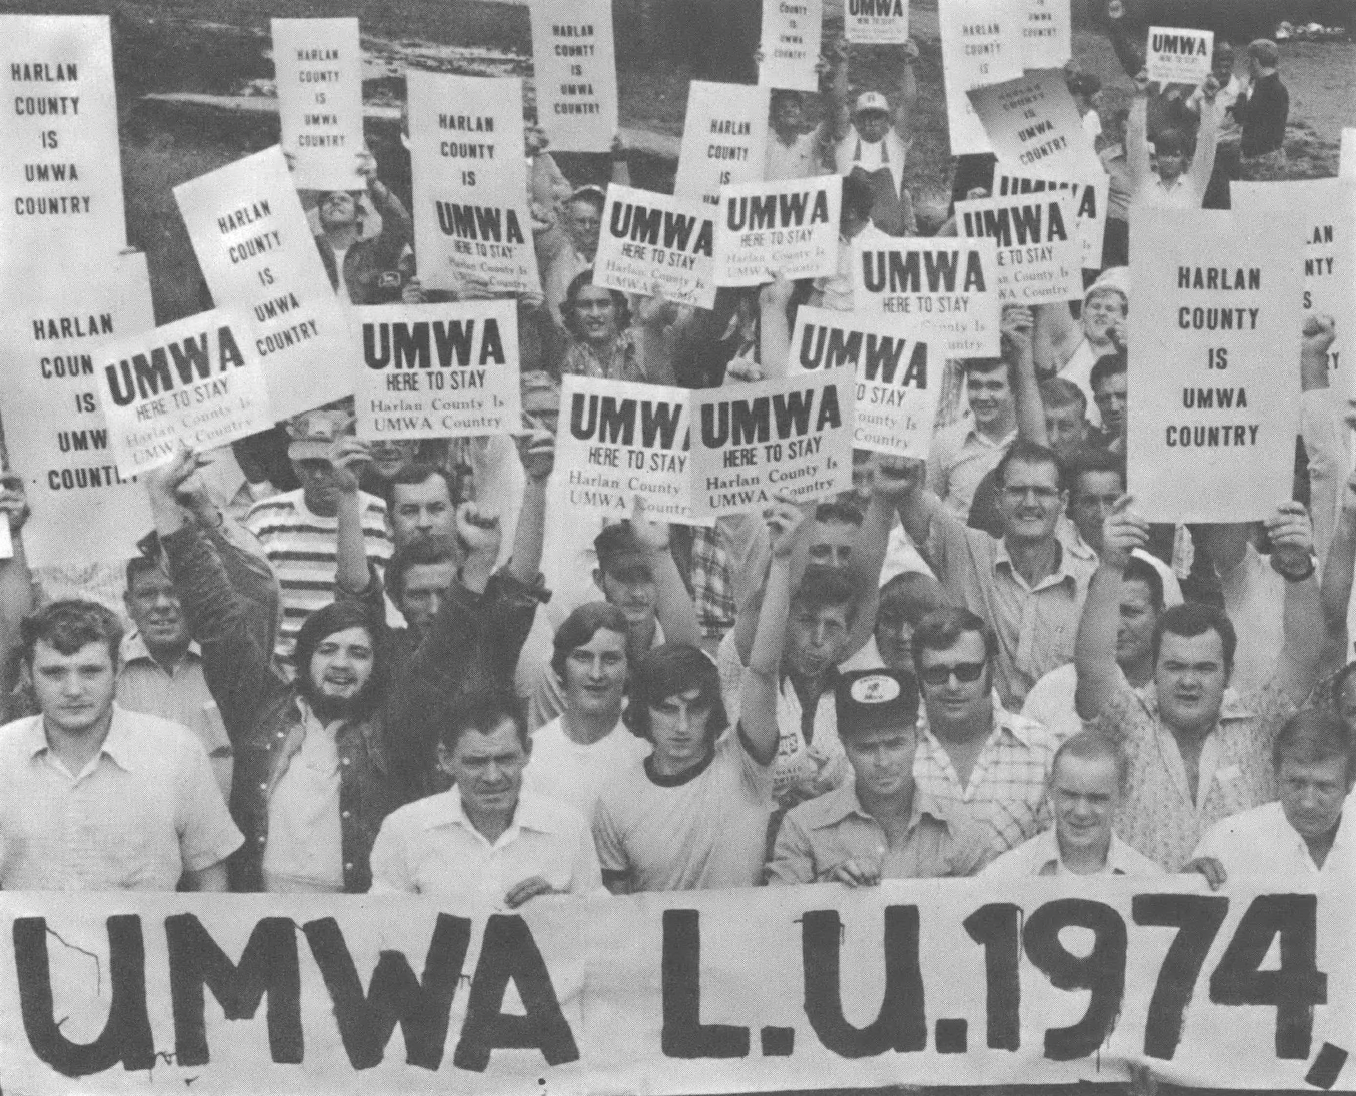 Photograph of people holding signs and a banner that reads "UMWA L.U. 1974"